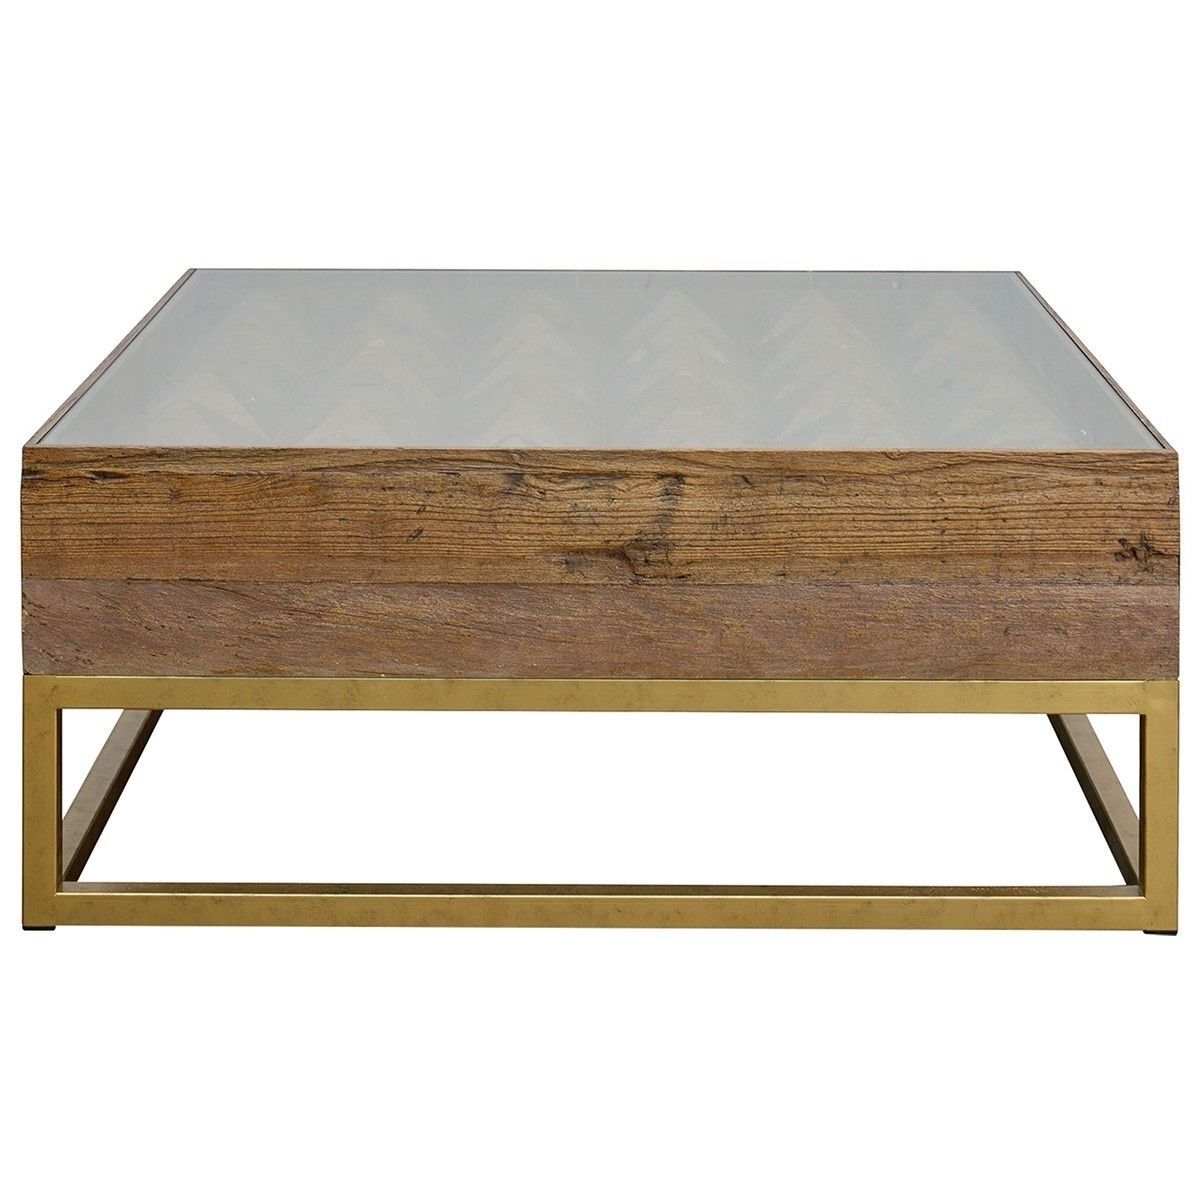 Teddy Reclaimed Elm Timber & Iron Square Coffee Table, 100cm With Regard To Widely Used Reclaimed Elm Iron Coffee Tables (View 10 of 20)